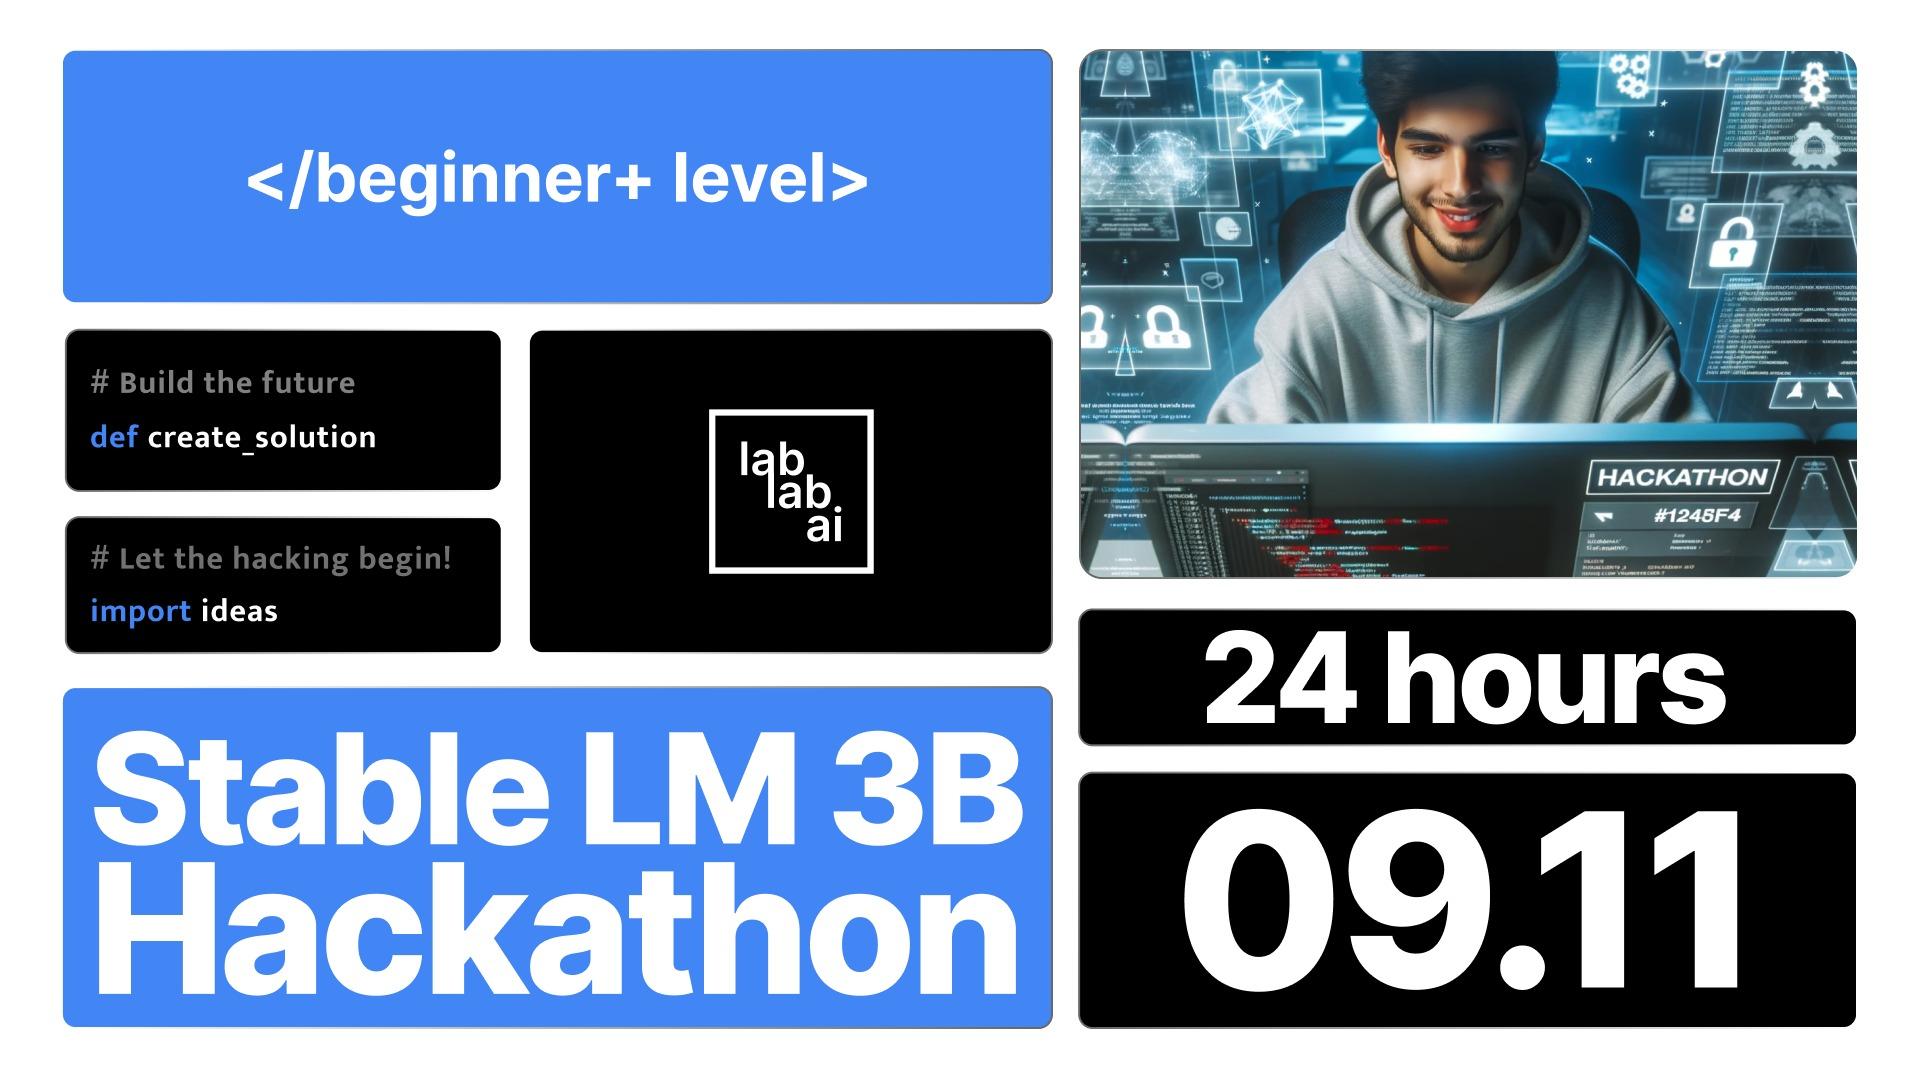 Stable LM 3B 24-hours Hackathon